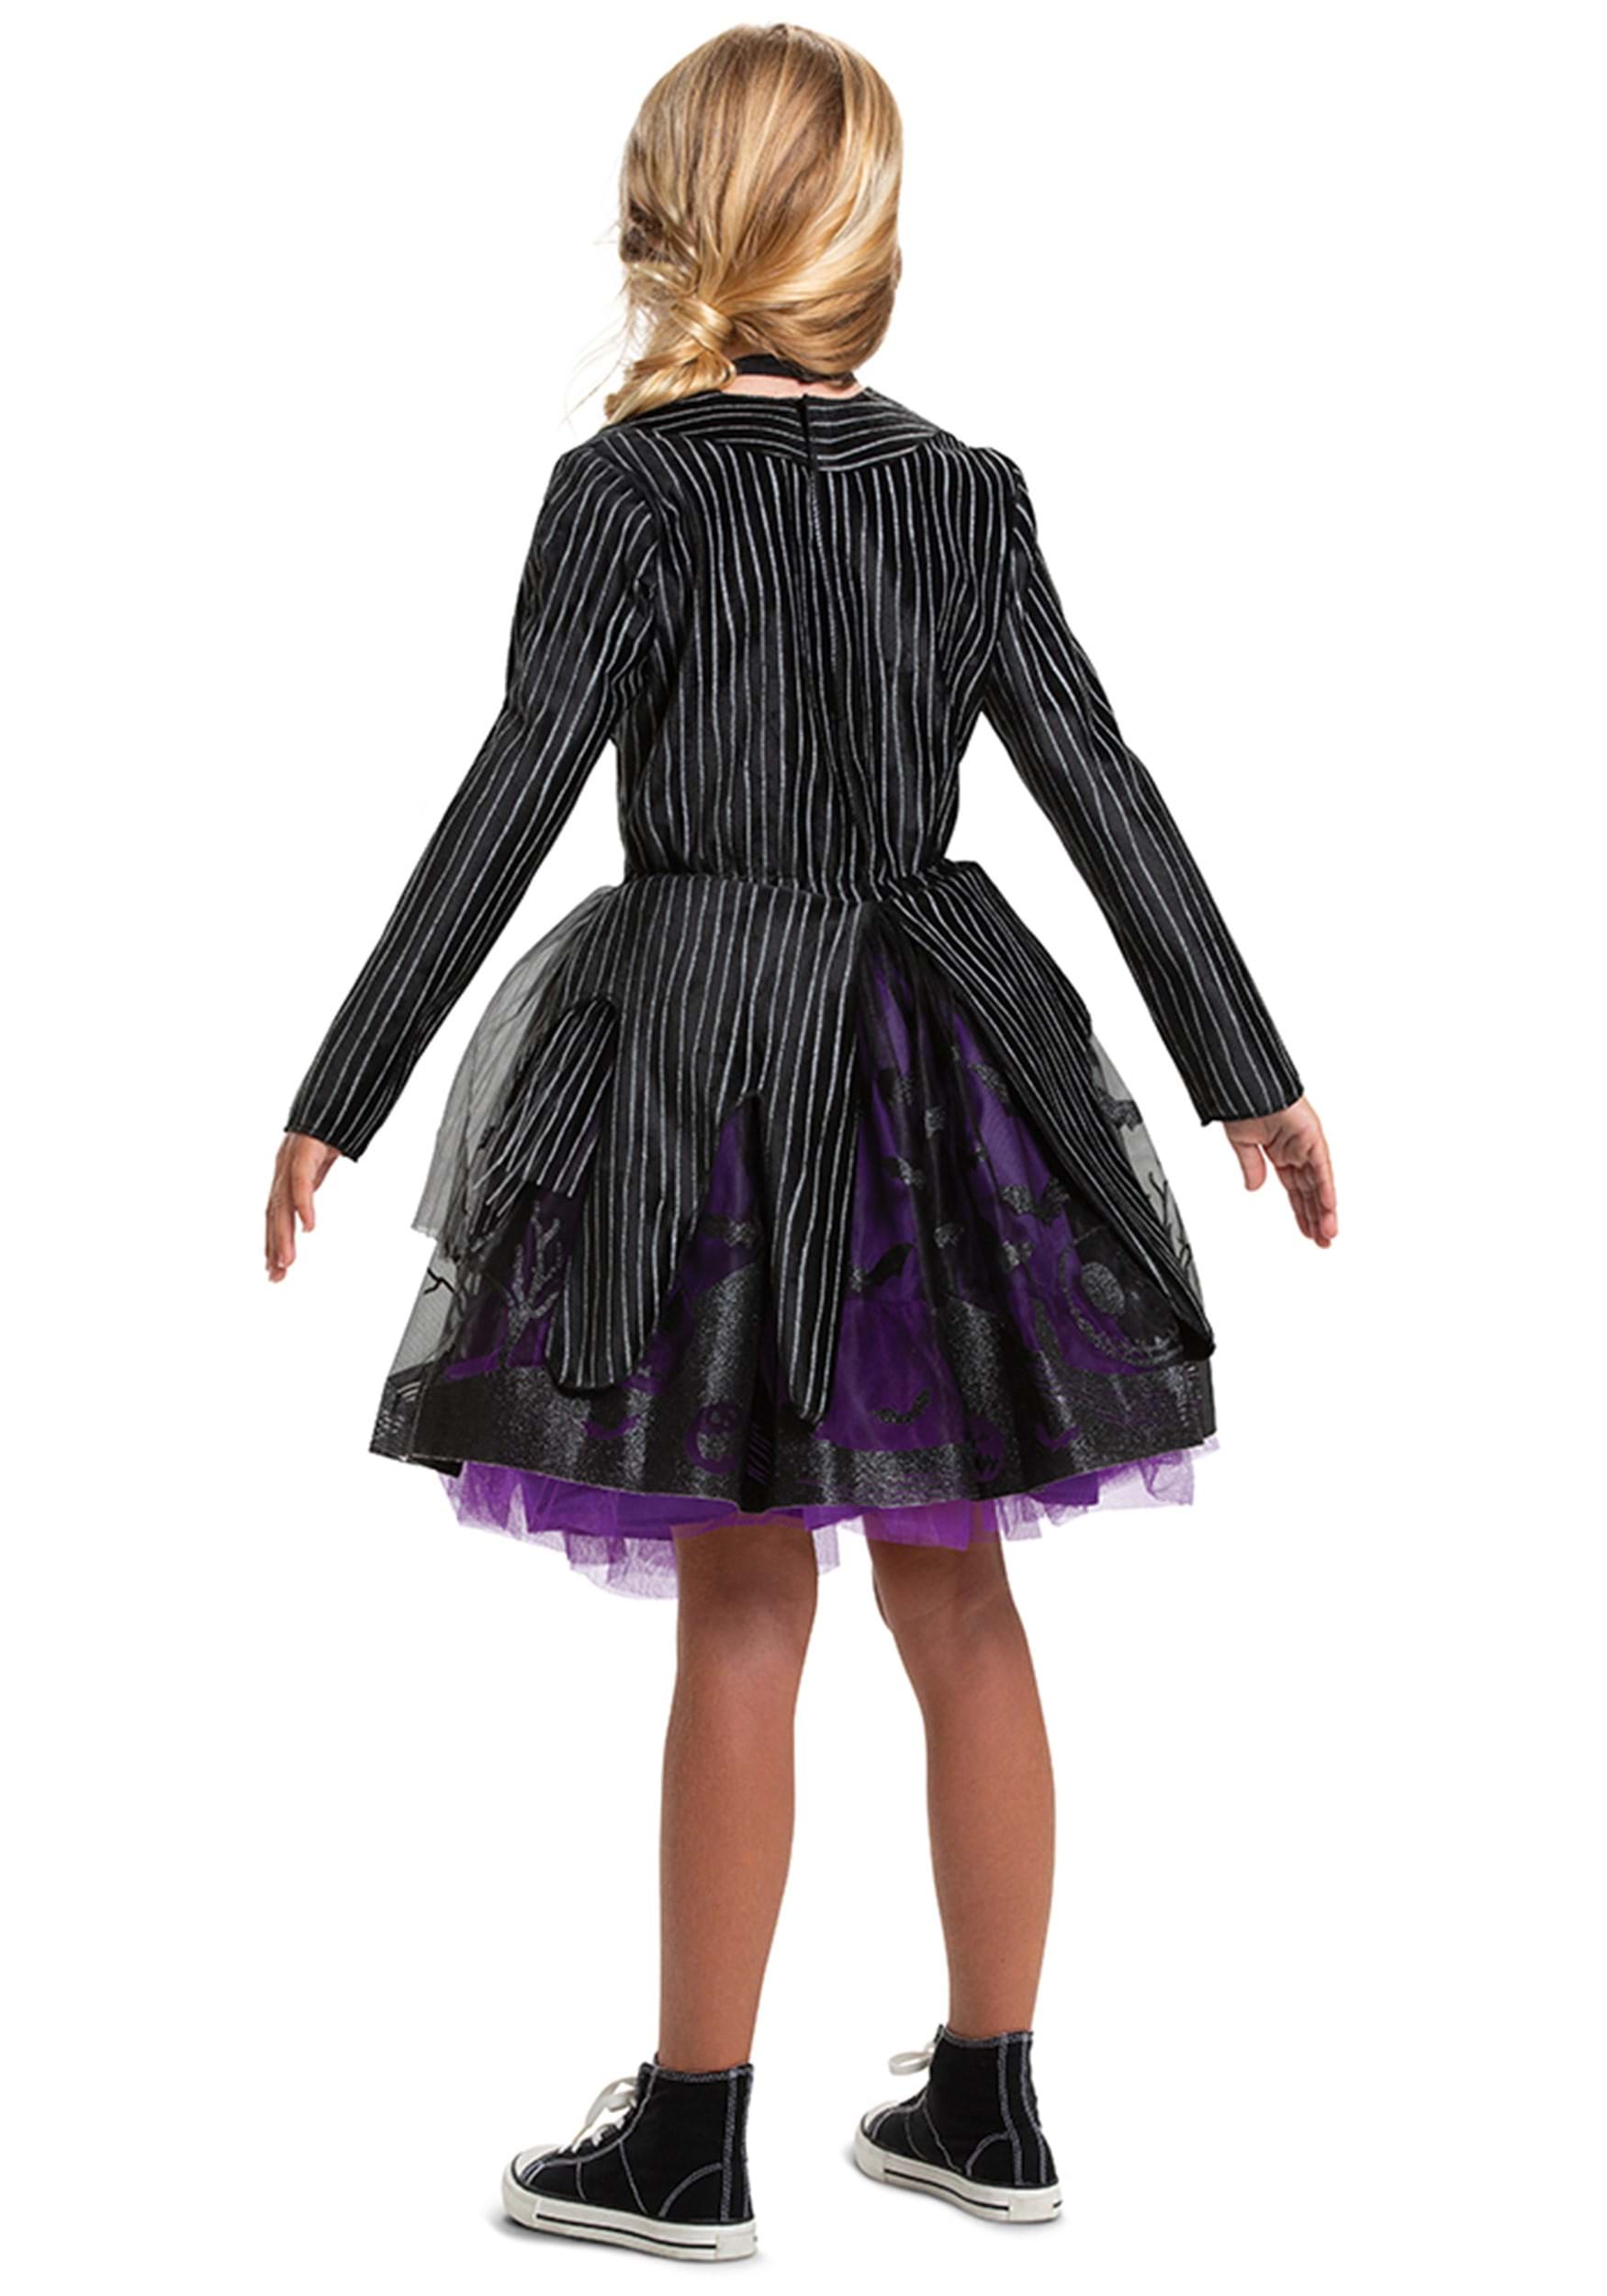 NEW Boutique Jack Skellington Nightmare Before Christmas Girls Outfit Set 